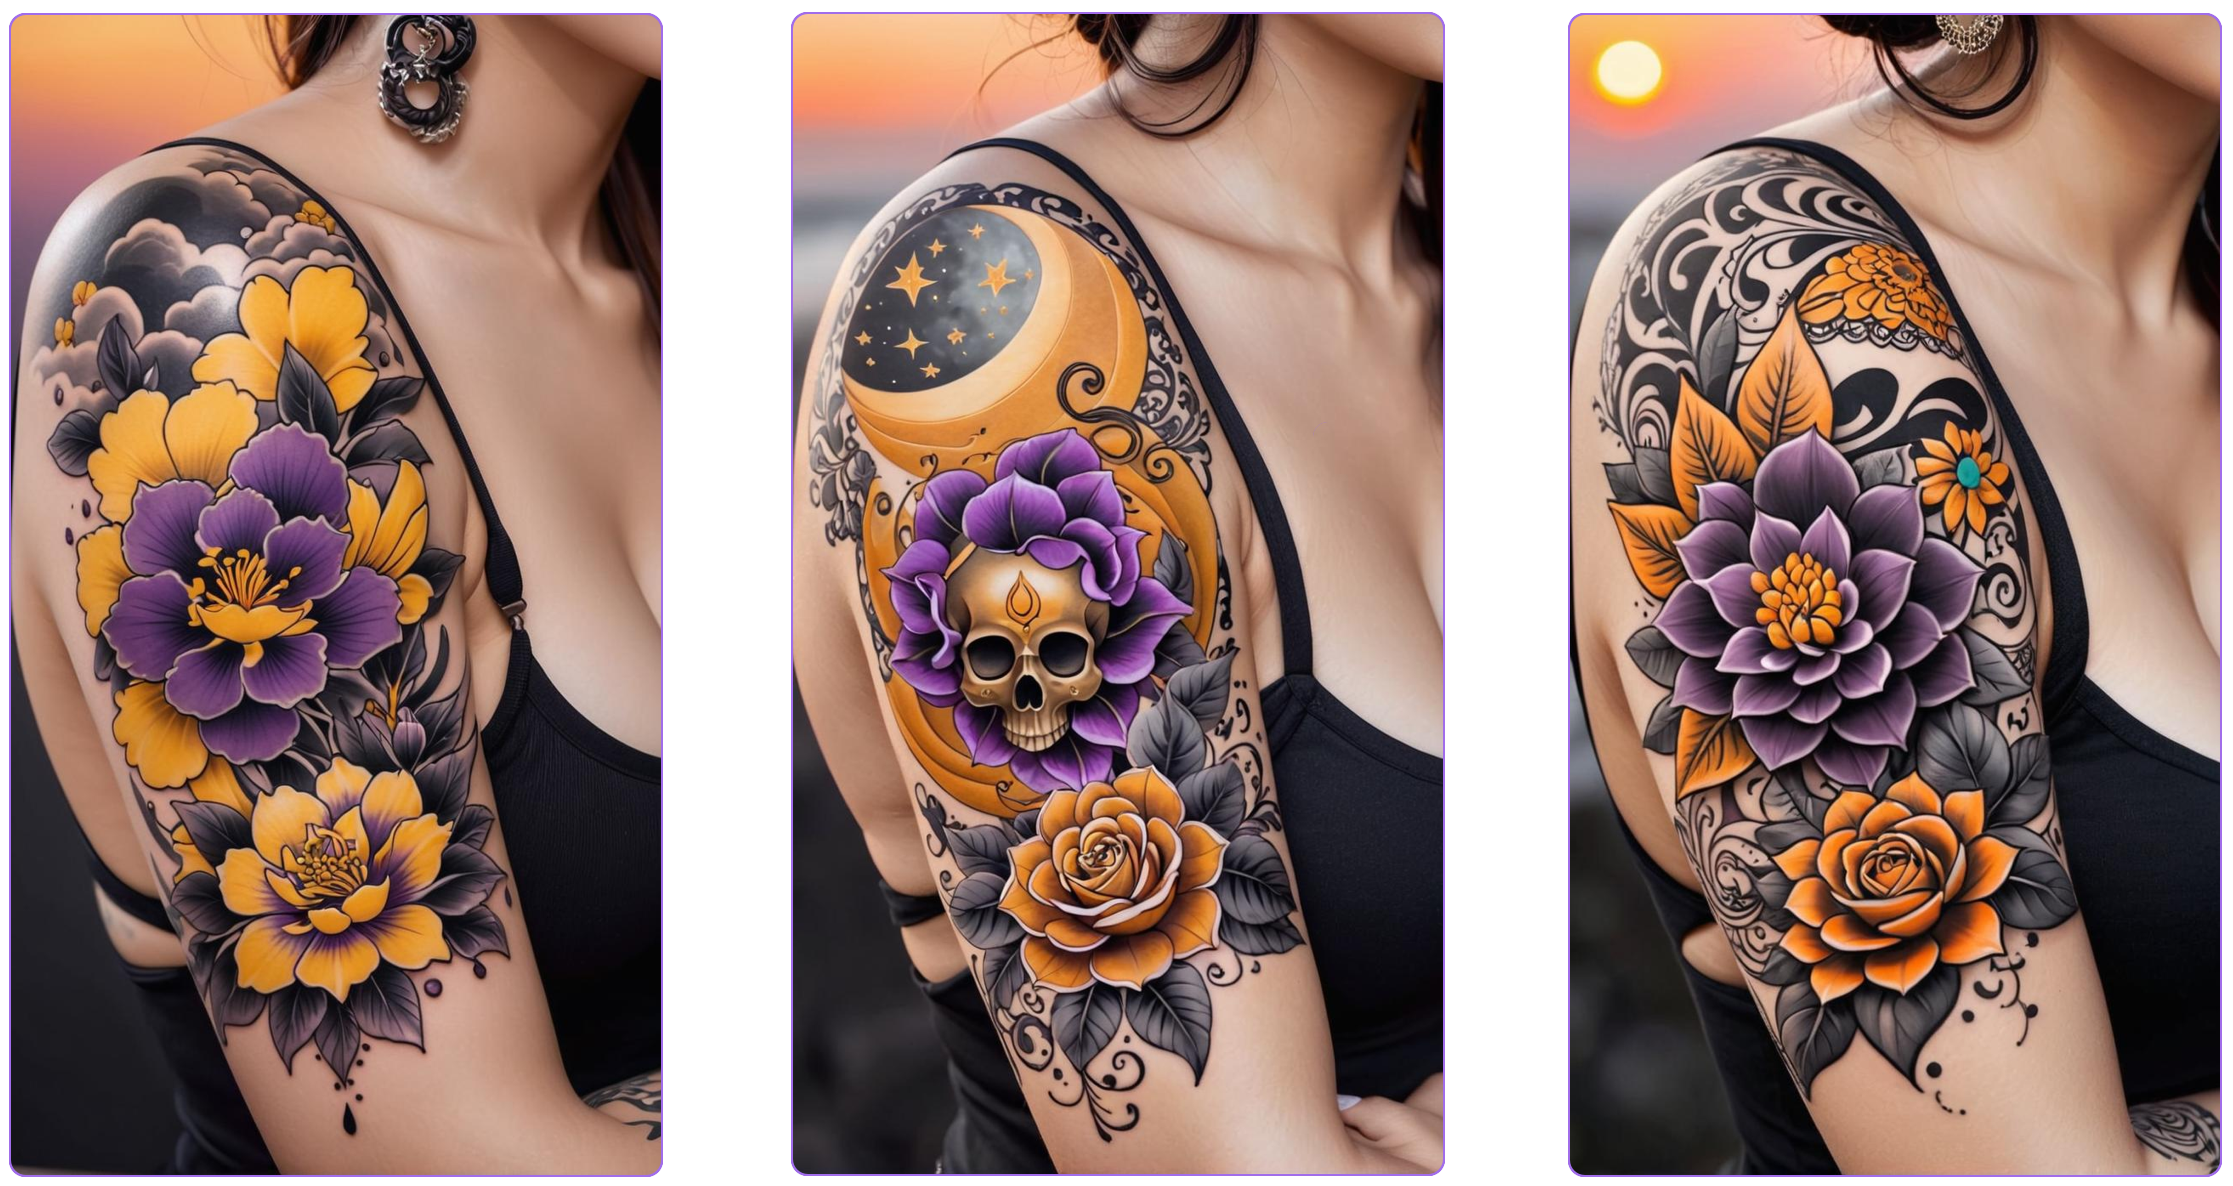 Create unlimited tattoo design variations with Remix